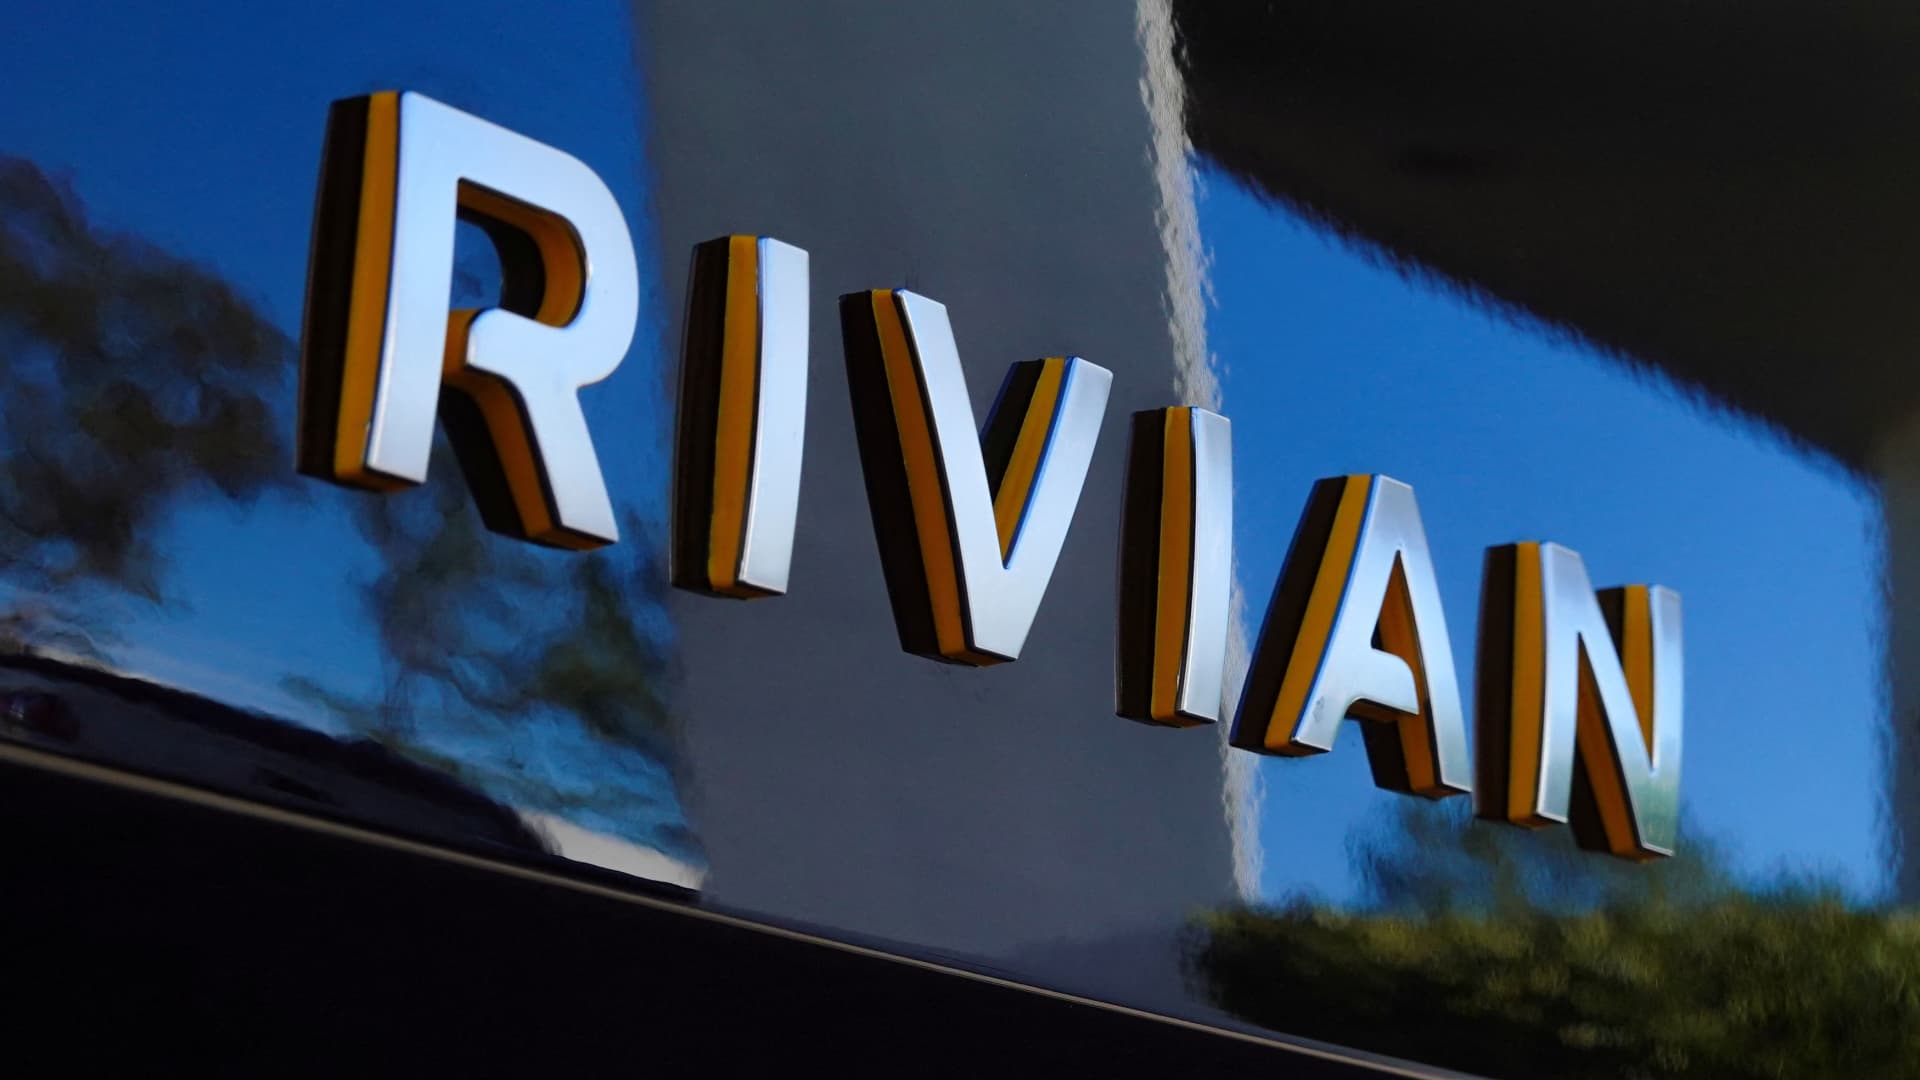 The Rivian name is shown on one of their new electric SUV vehicles in San Diego, U.S., December 16, 2022.